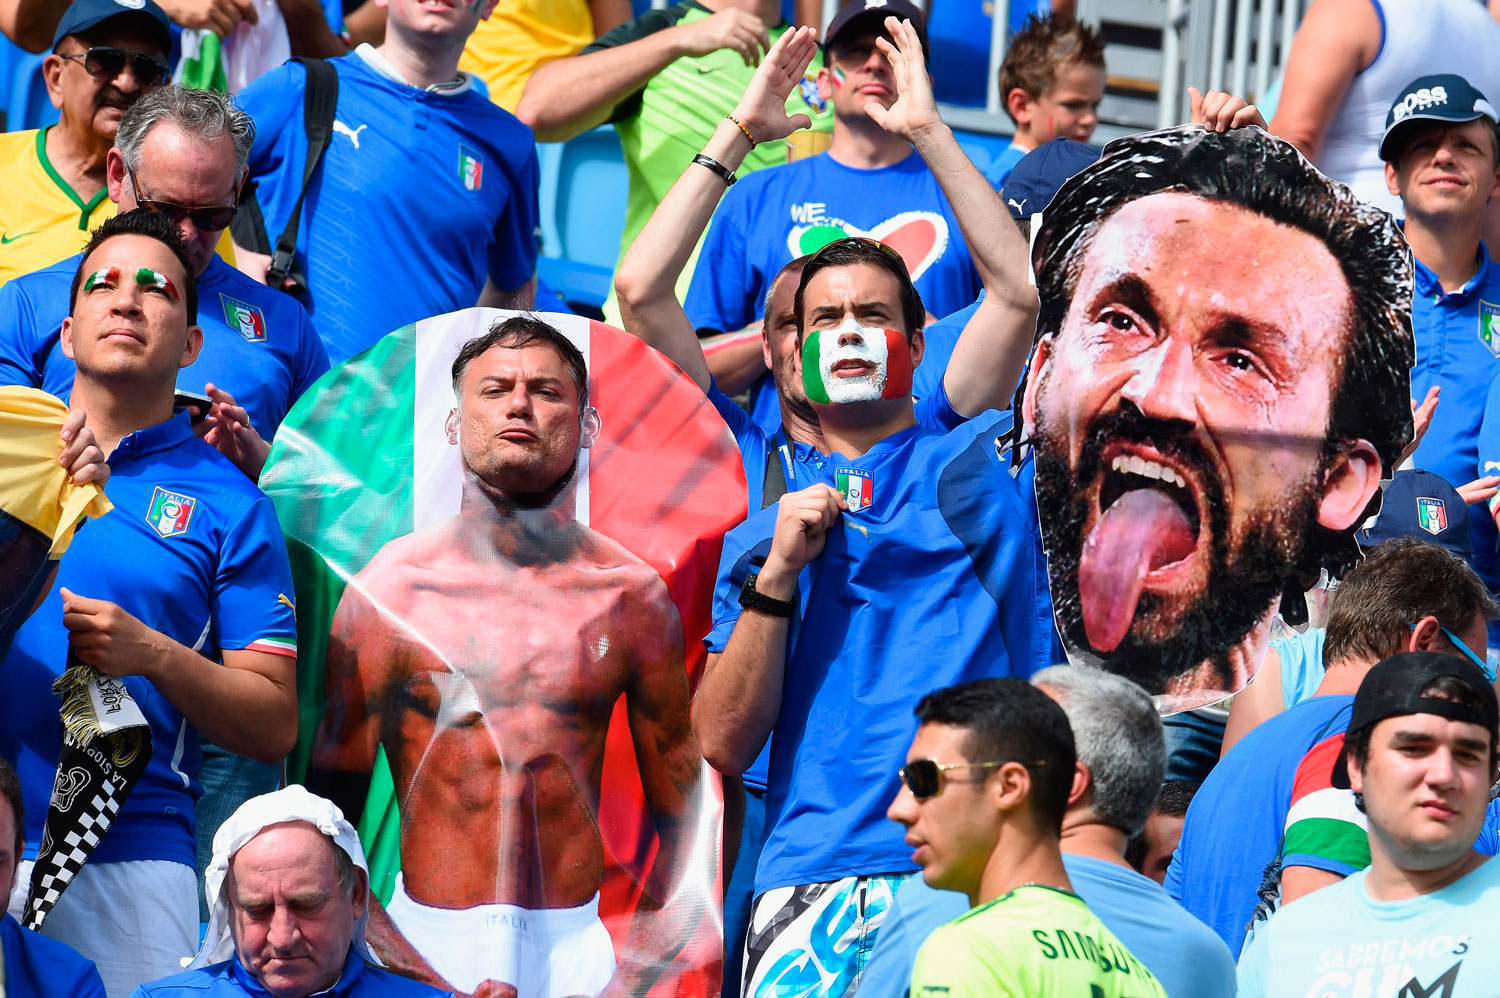 Italy fans hold a cutout of Andrea Pirlo during the match between Italy and Uruguay at Estadio das Dunas on June 24, 2014 in Natal, Brazil.